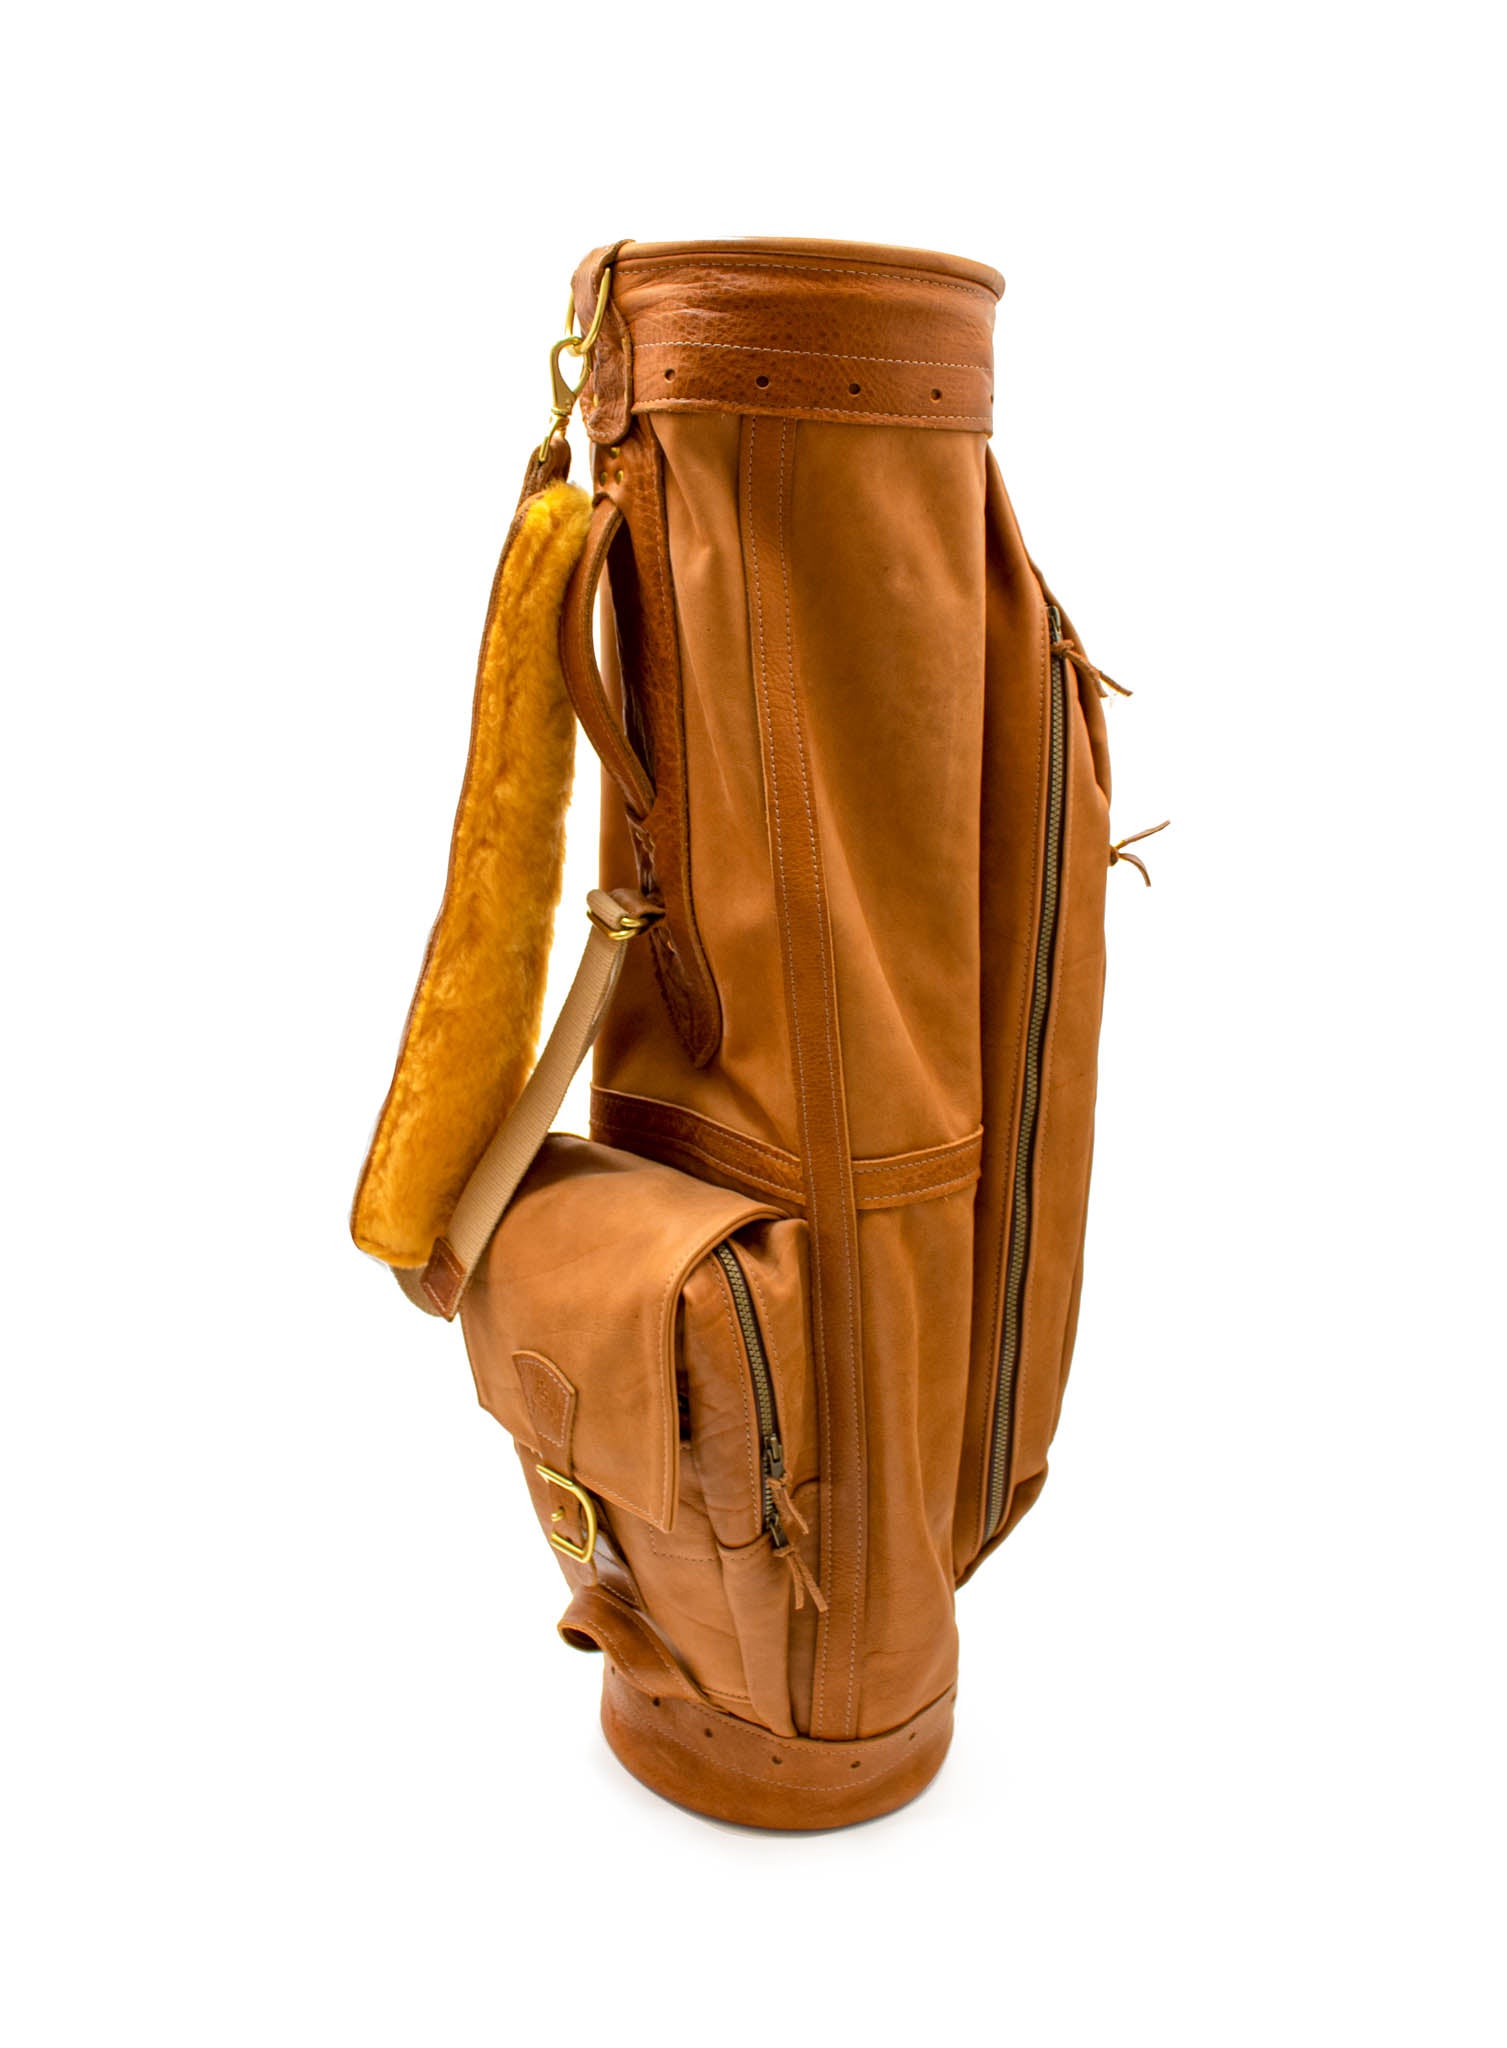 Saddle Leather Golf Bags - Real Leather Studio